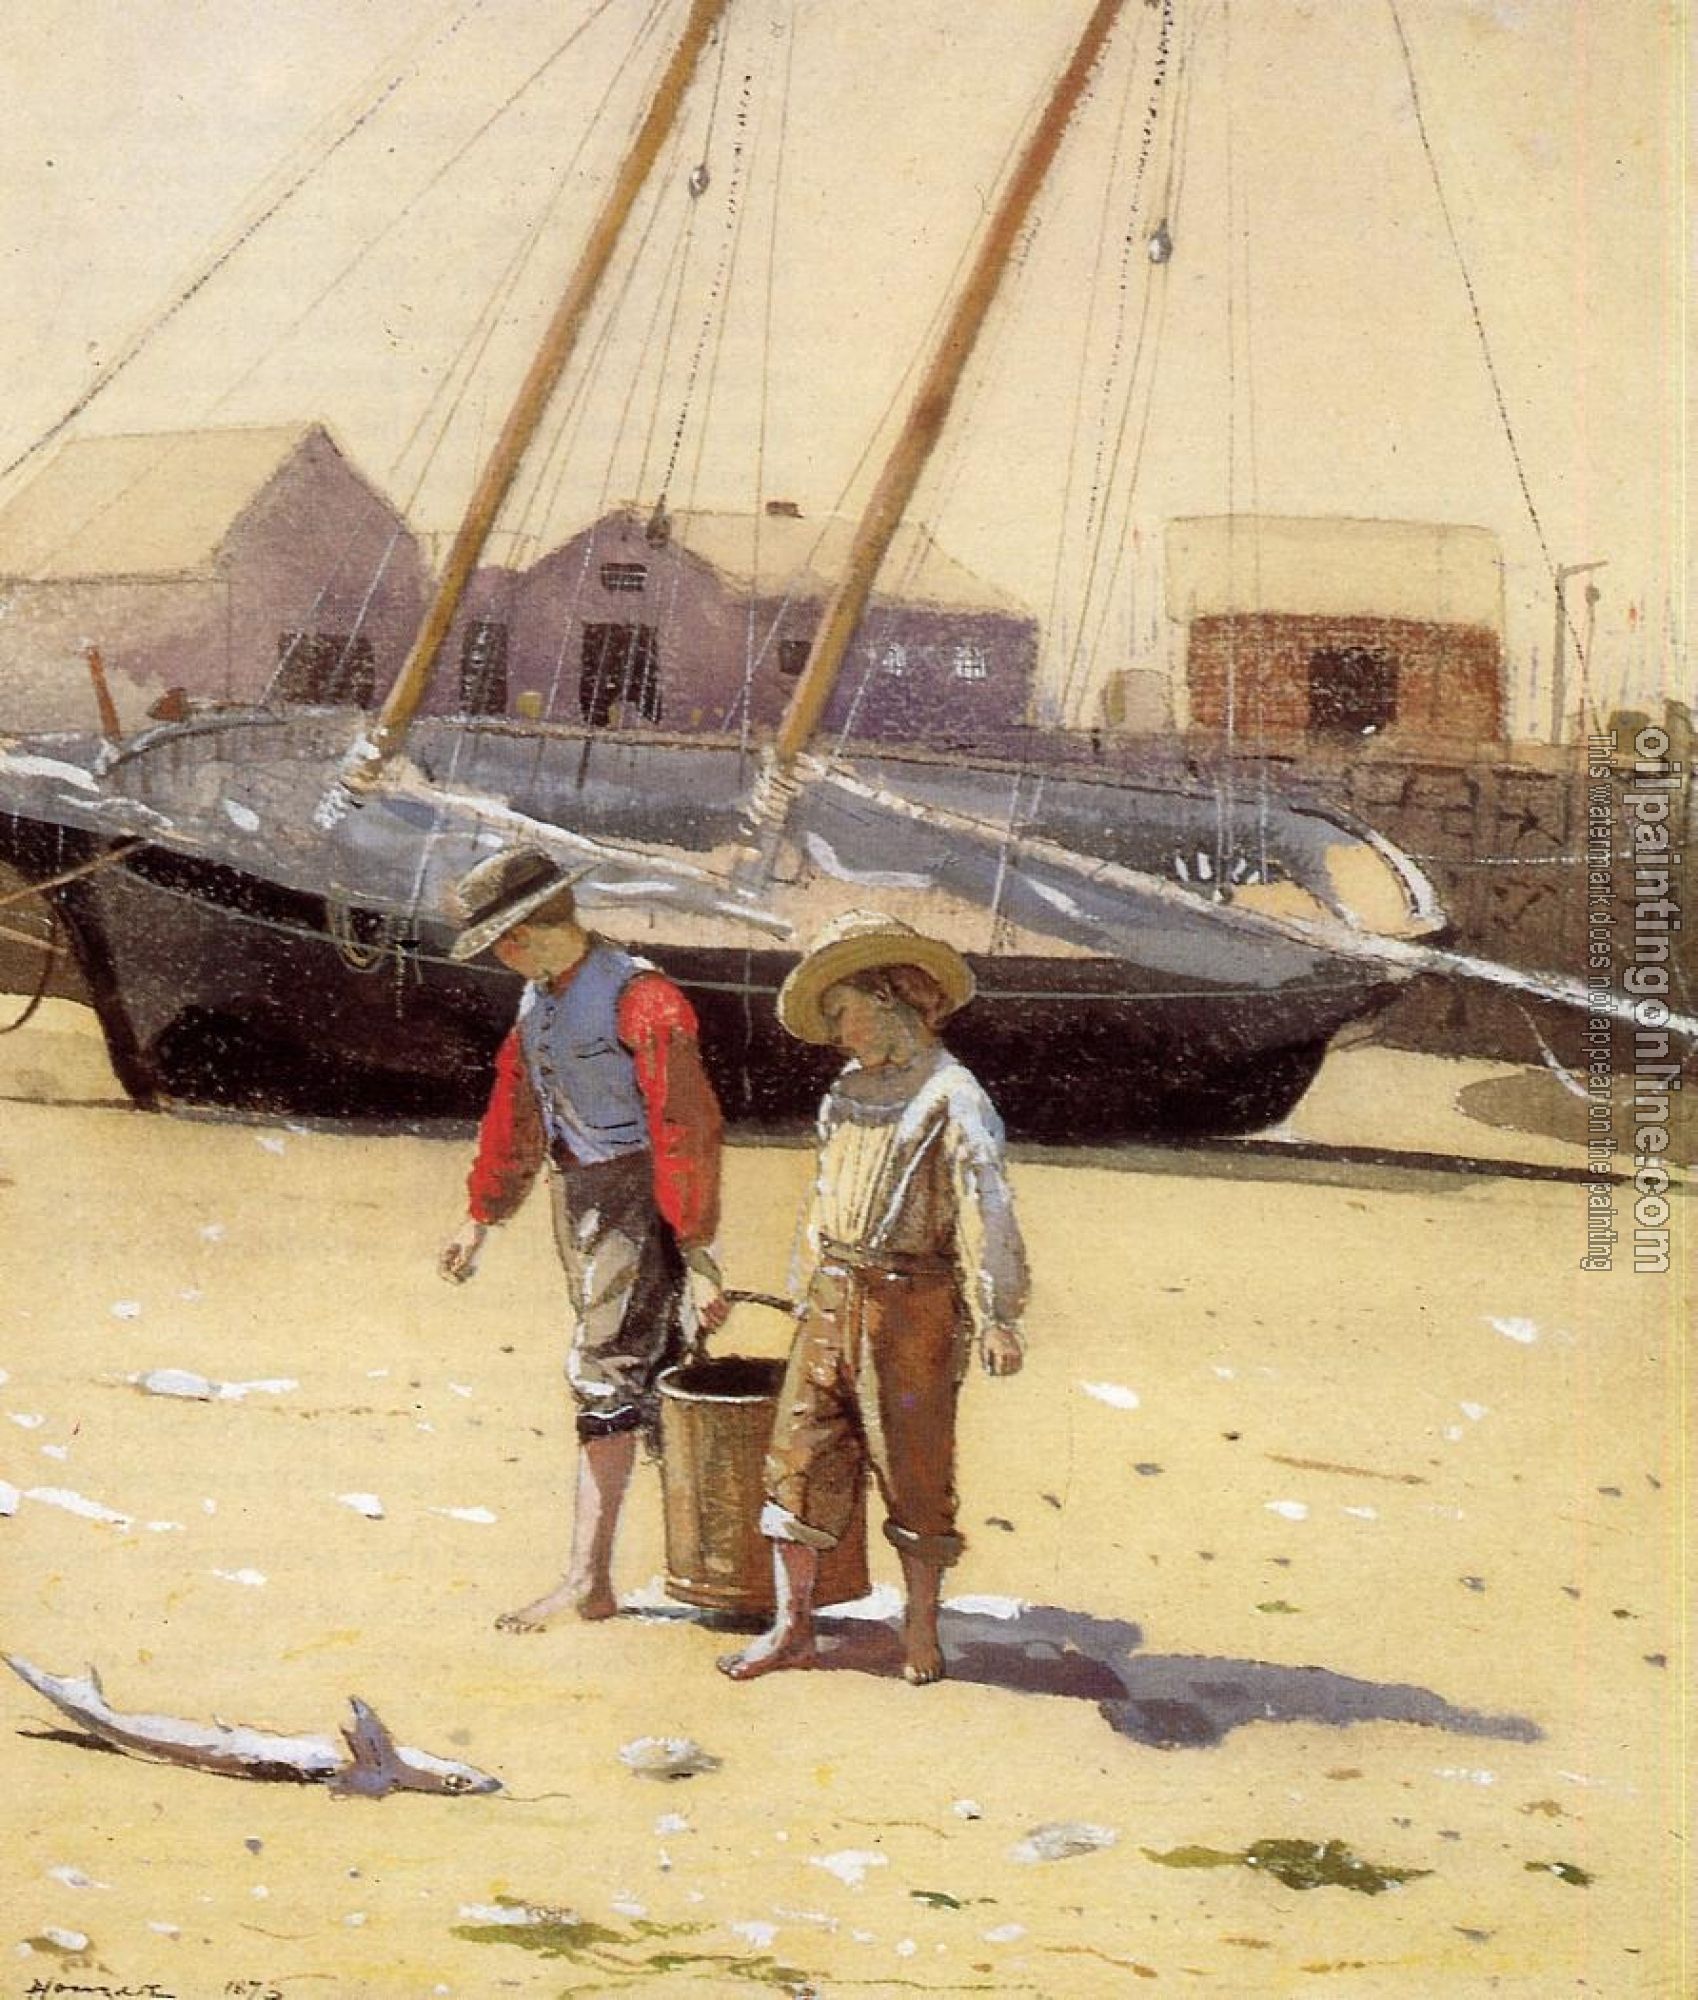 Homer, Winslow - A Basket of Clams